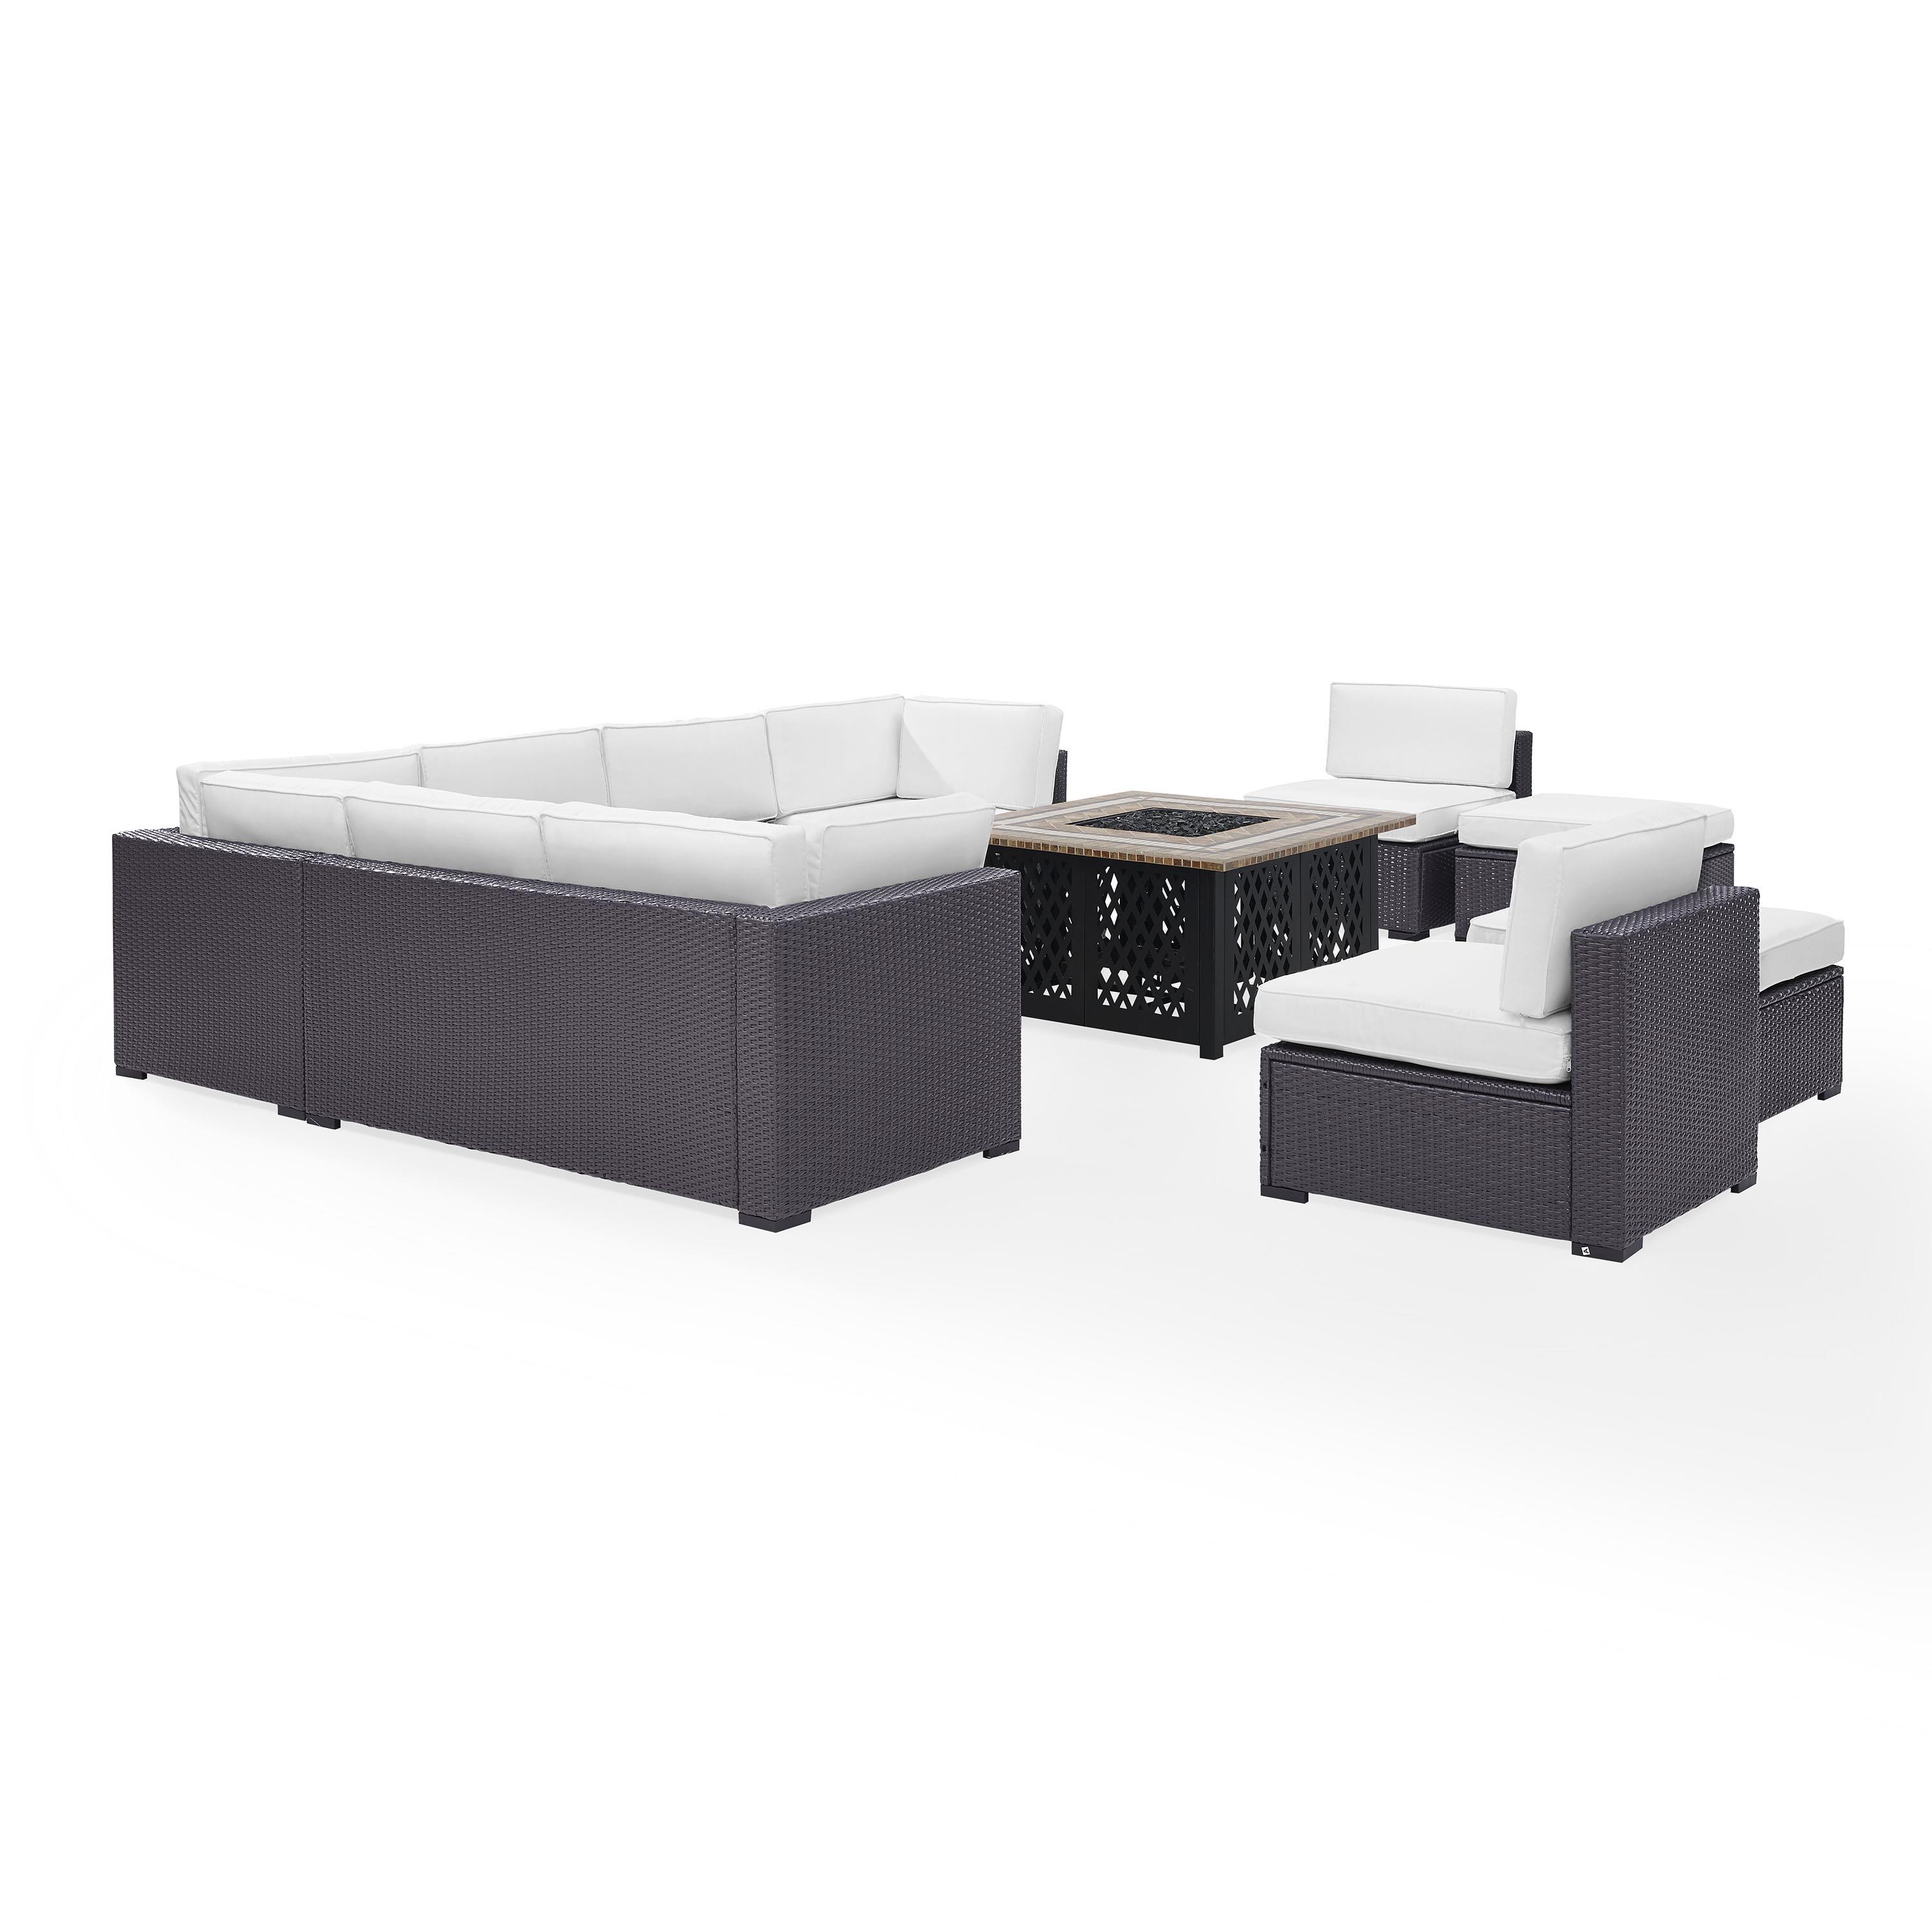 Crosley Furniture Biscayne 8 Piece Fabric Patio Fire Pit Sectional Set in White - image 3 of 4